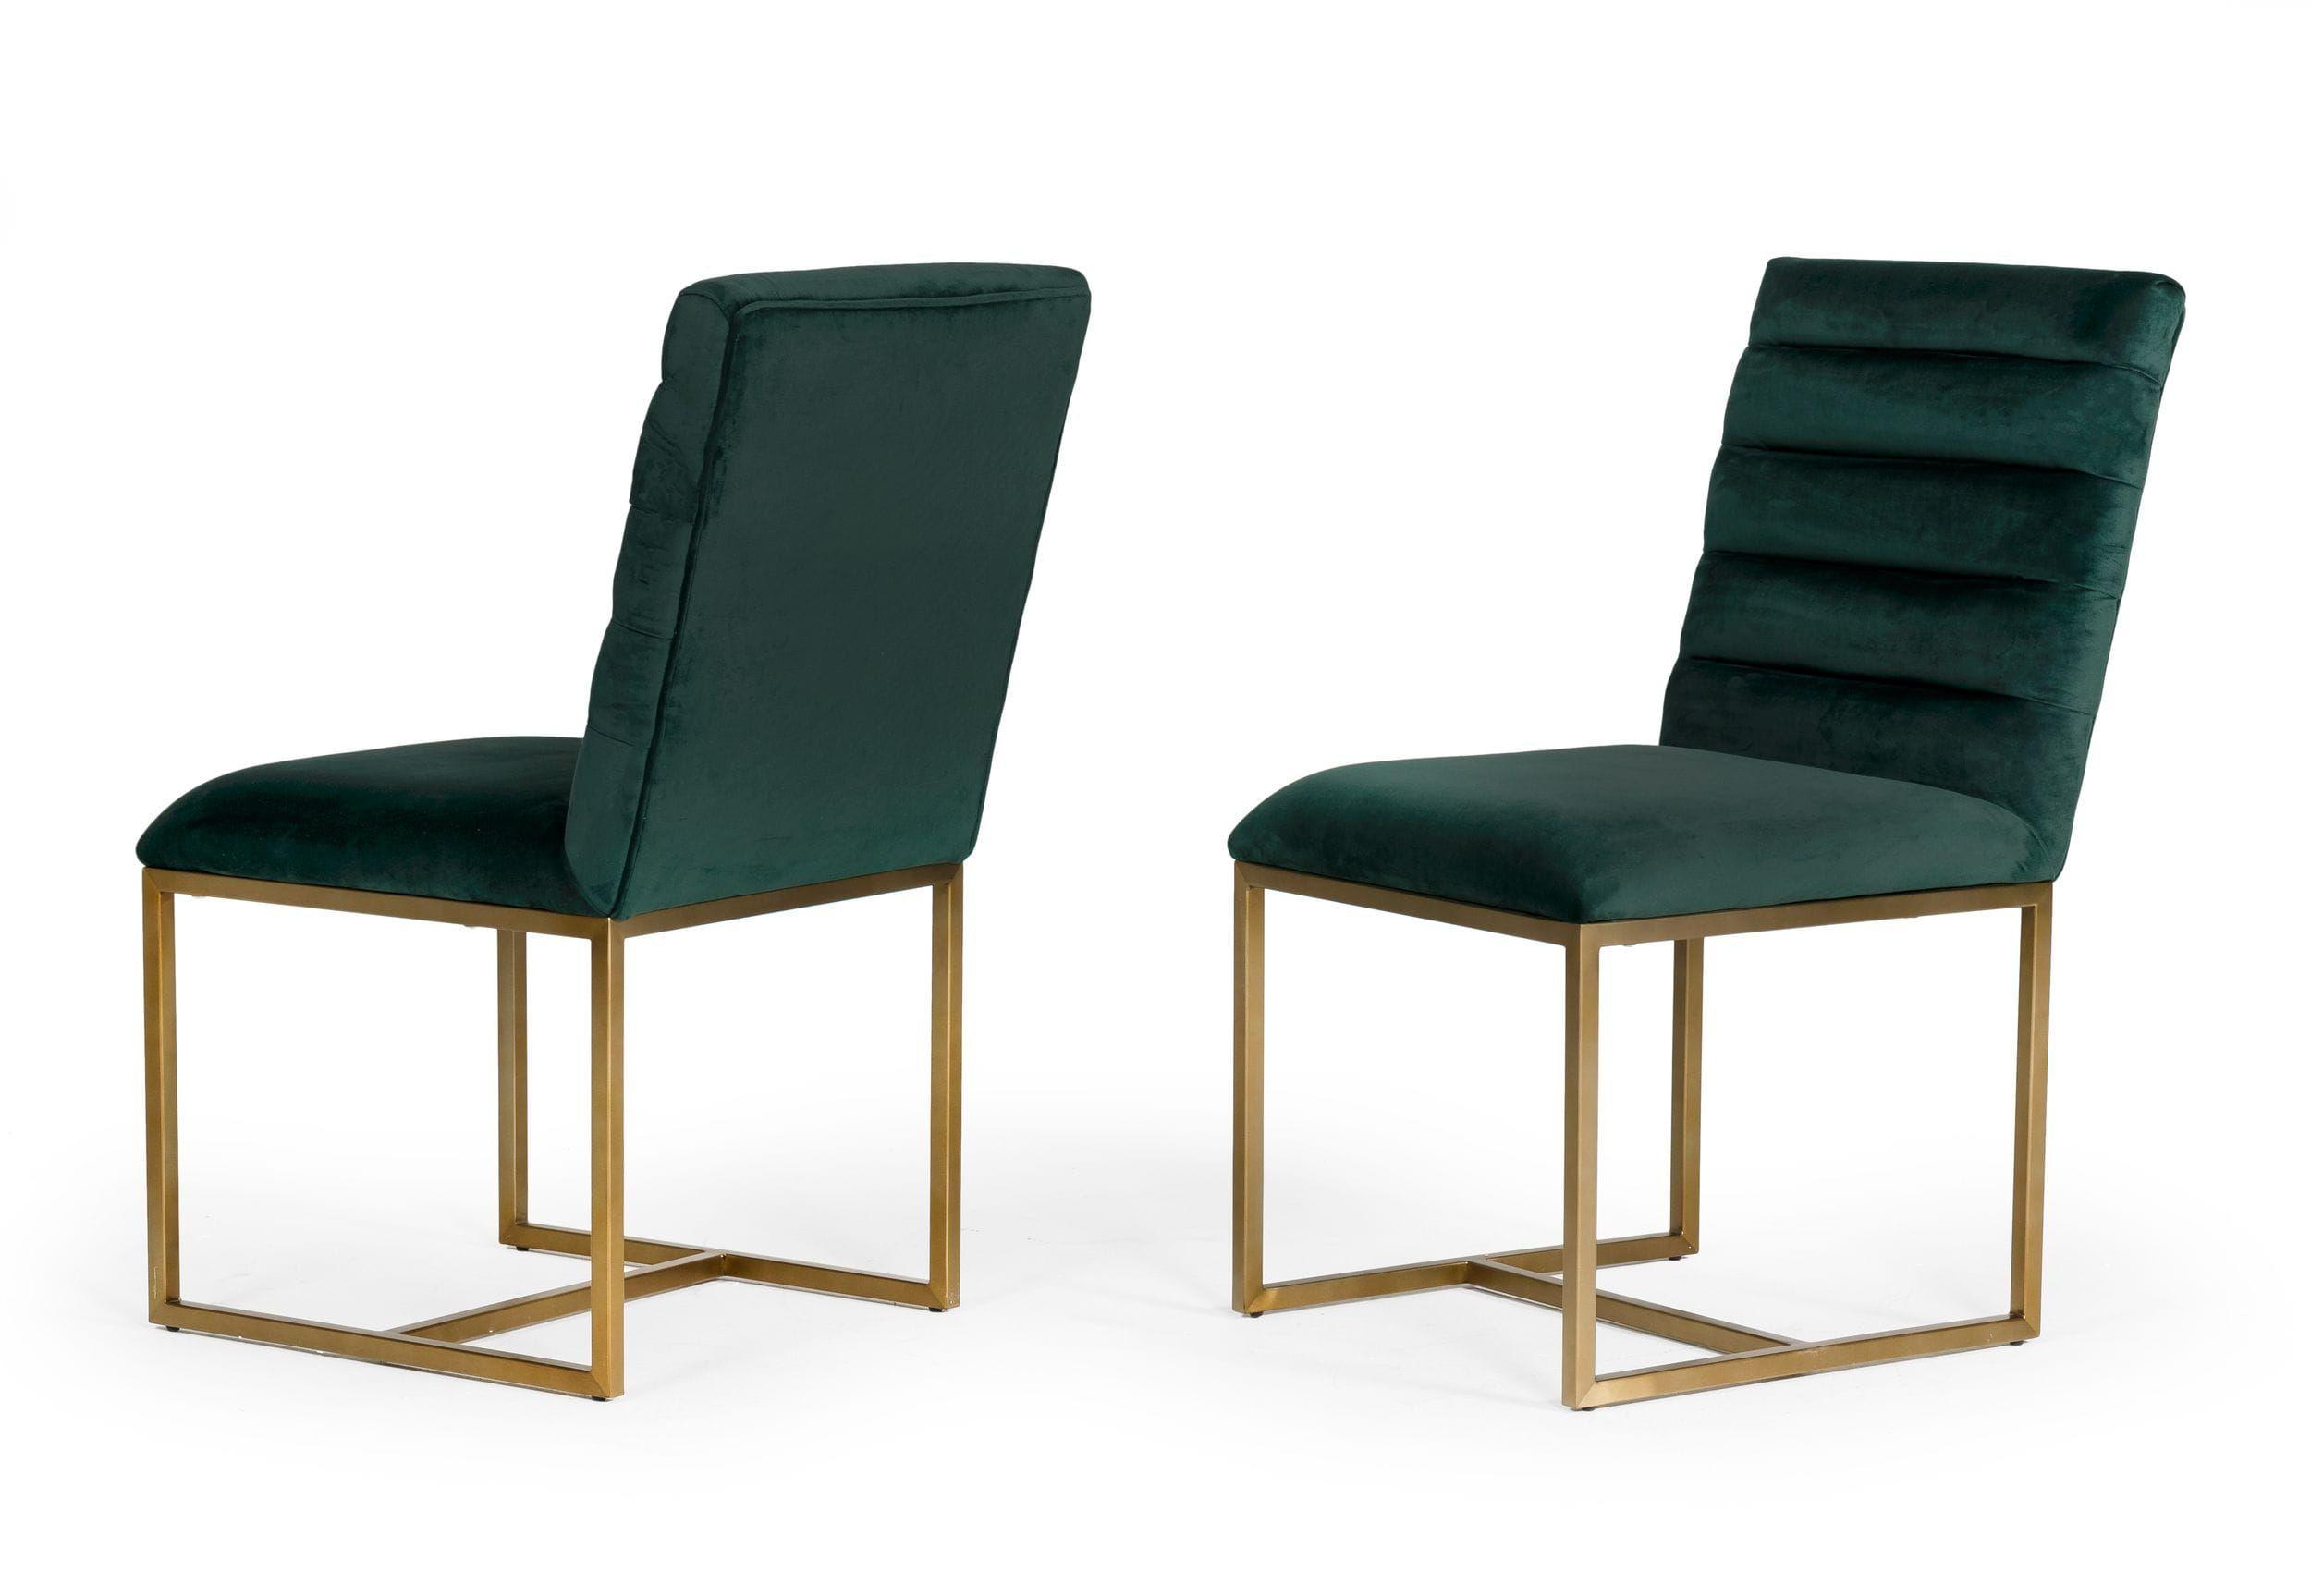 Contemporary, Modern Dining Chair Set Barker VGGMDC-1251A-GRN-2pcs in Green Fabric